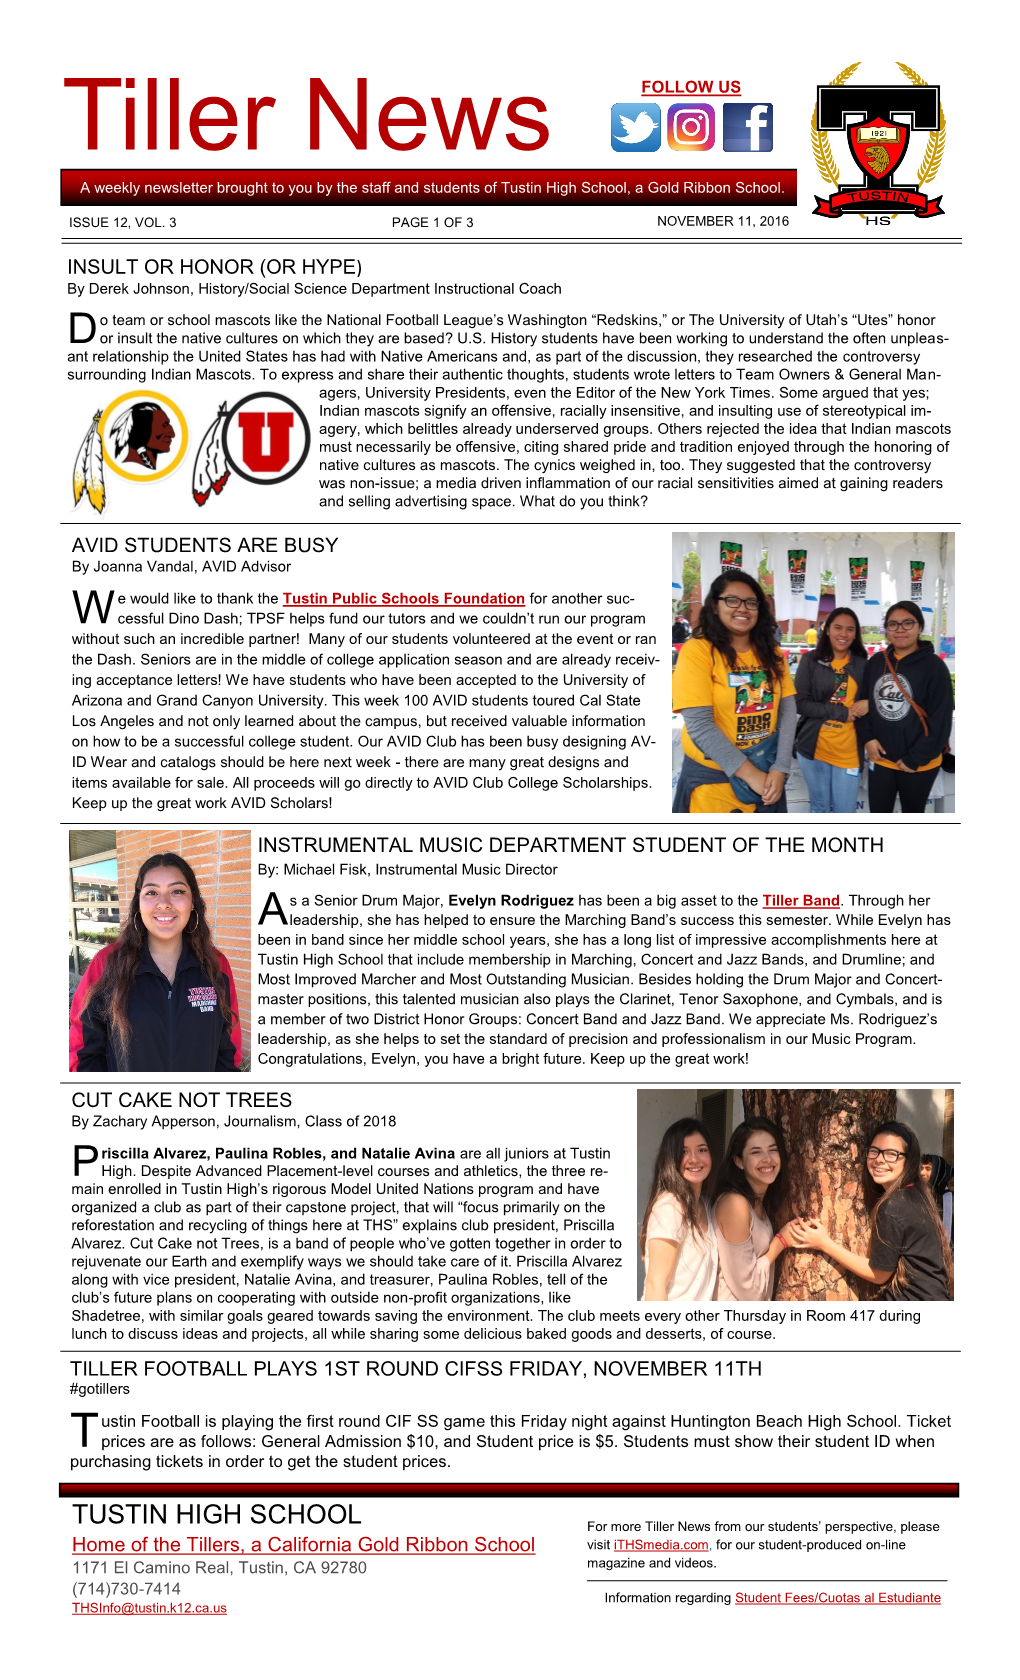 Tiller News FOLLOW US a Weekly Newsletter Brought to You by the Staff and Students of Tustin High School, a Gold Ribbon School